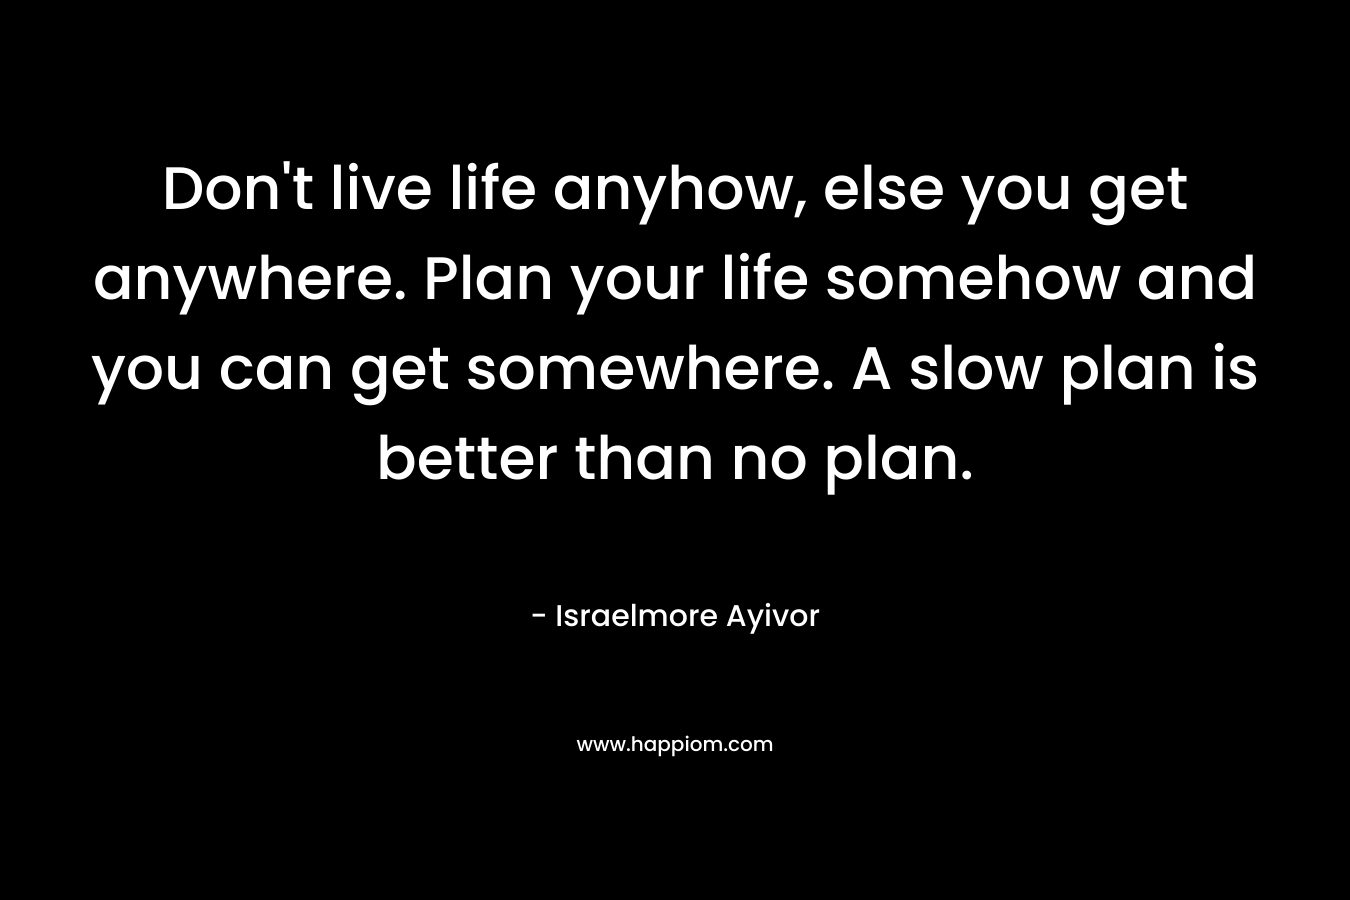 Don't live life anyhow, else you get anywhere. Plan your life somehow and you can get somewhere. A slow plan is better than no plan.